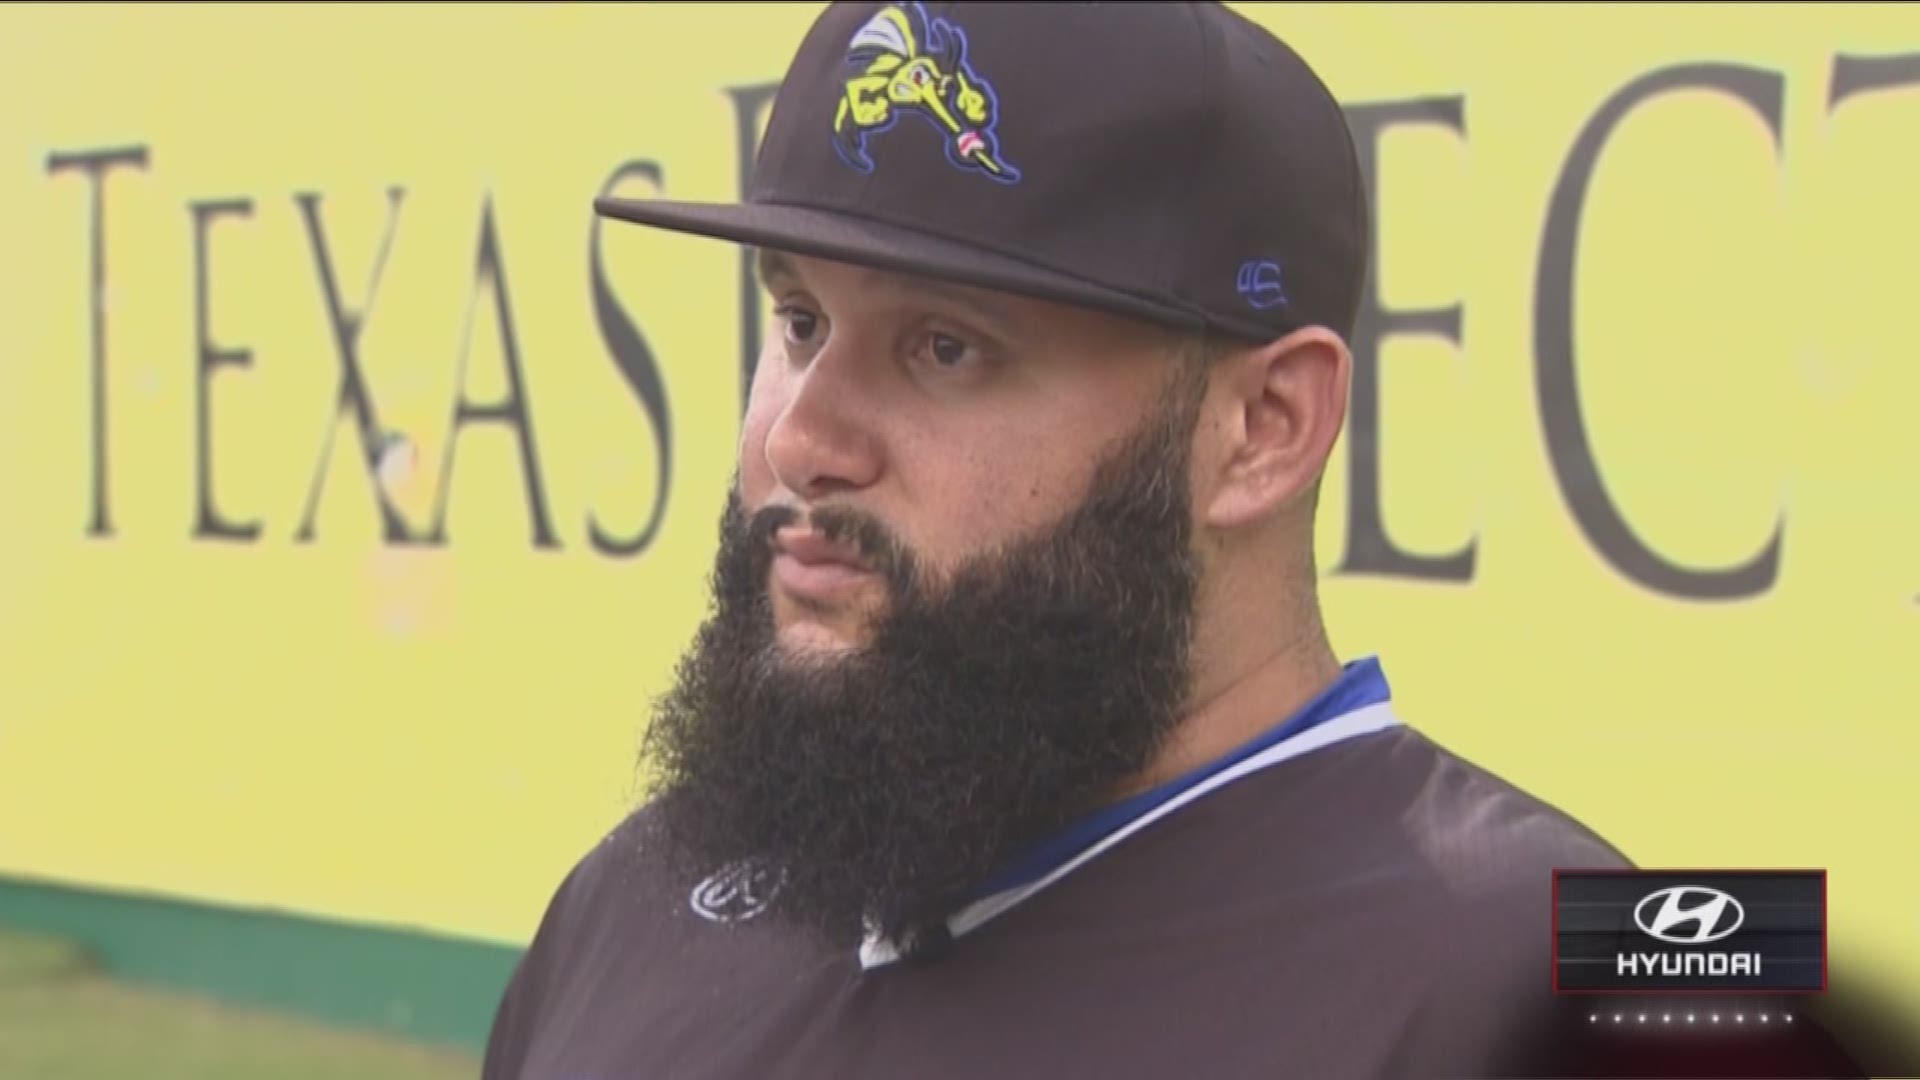 Nearly eight years after throwing his last pitch for the Astros, 34-year-old Felipe Paulino is now reinventing himself in the Atlantic League, moving from starter to closer. He's now one of the best in baseball, at any level.